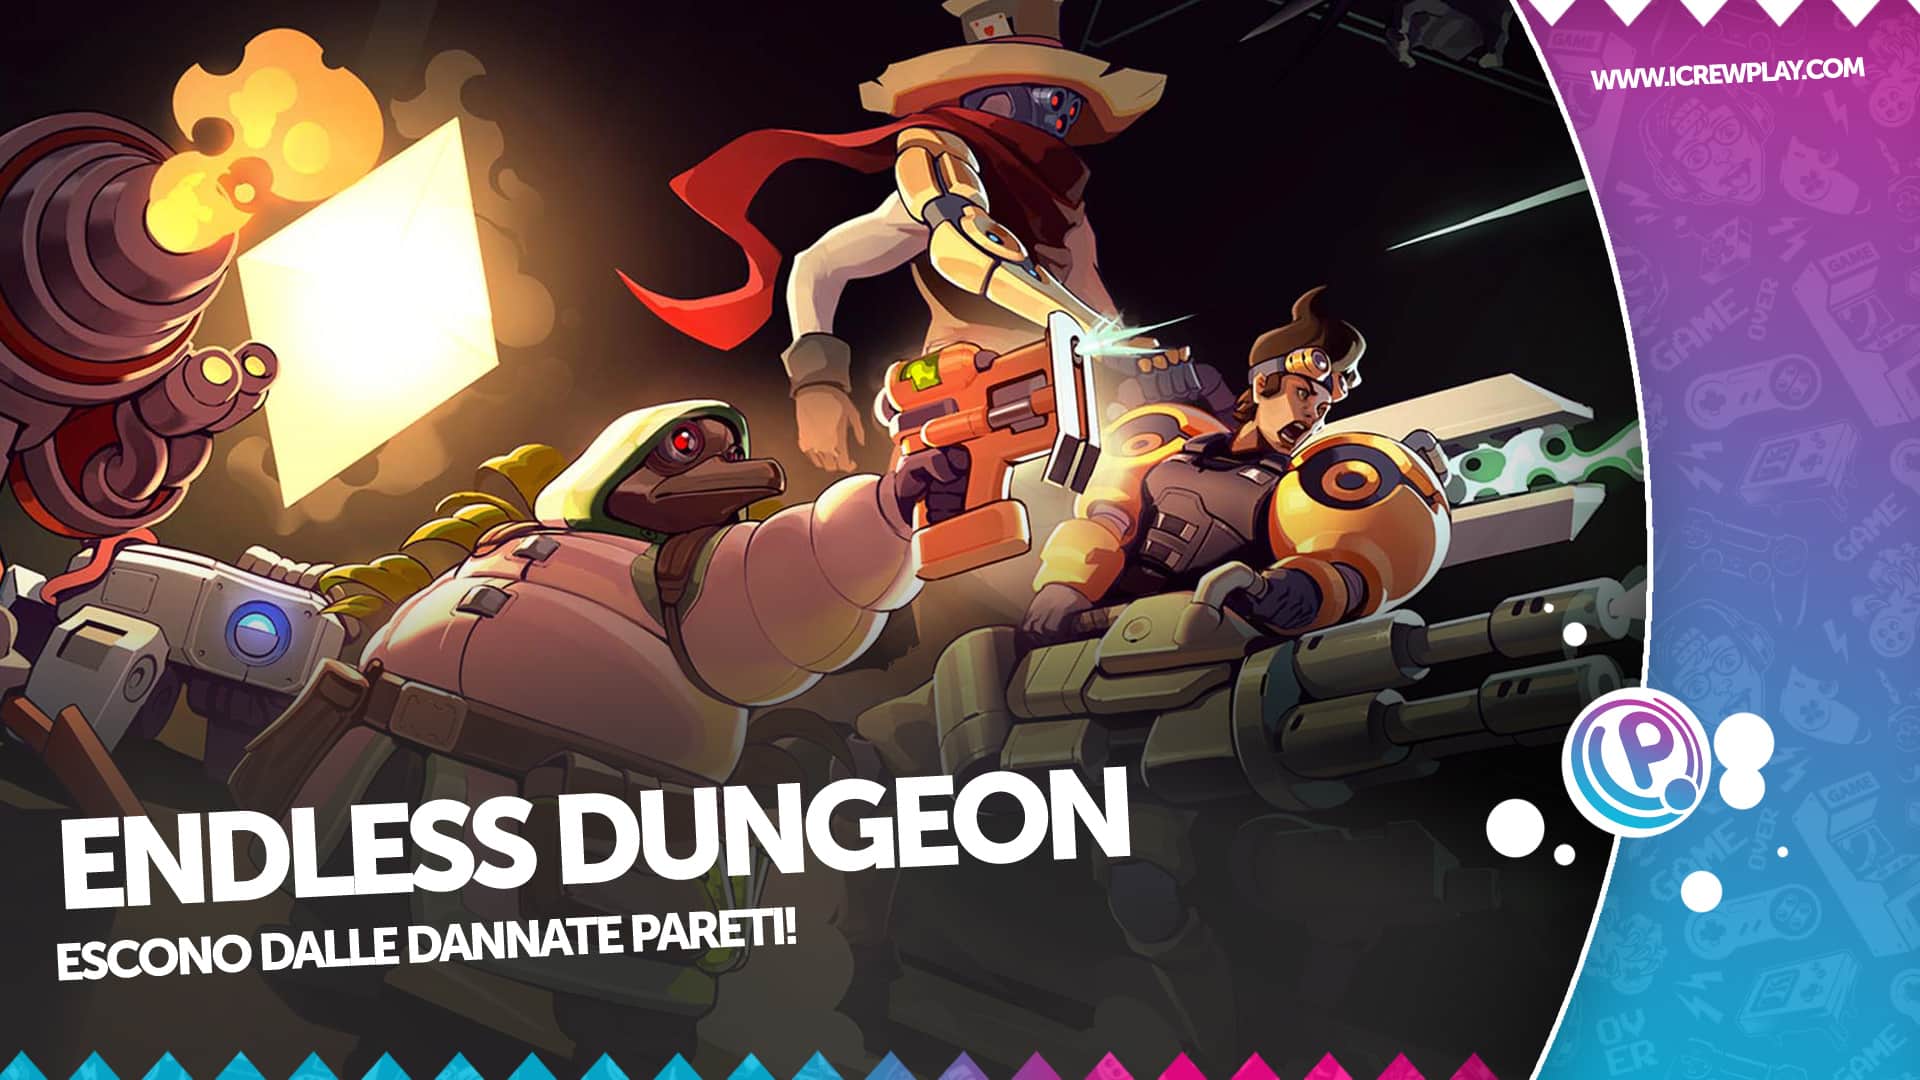 ENDLESS Dungeon recensione